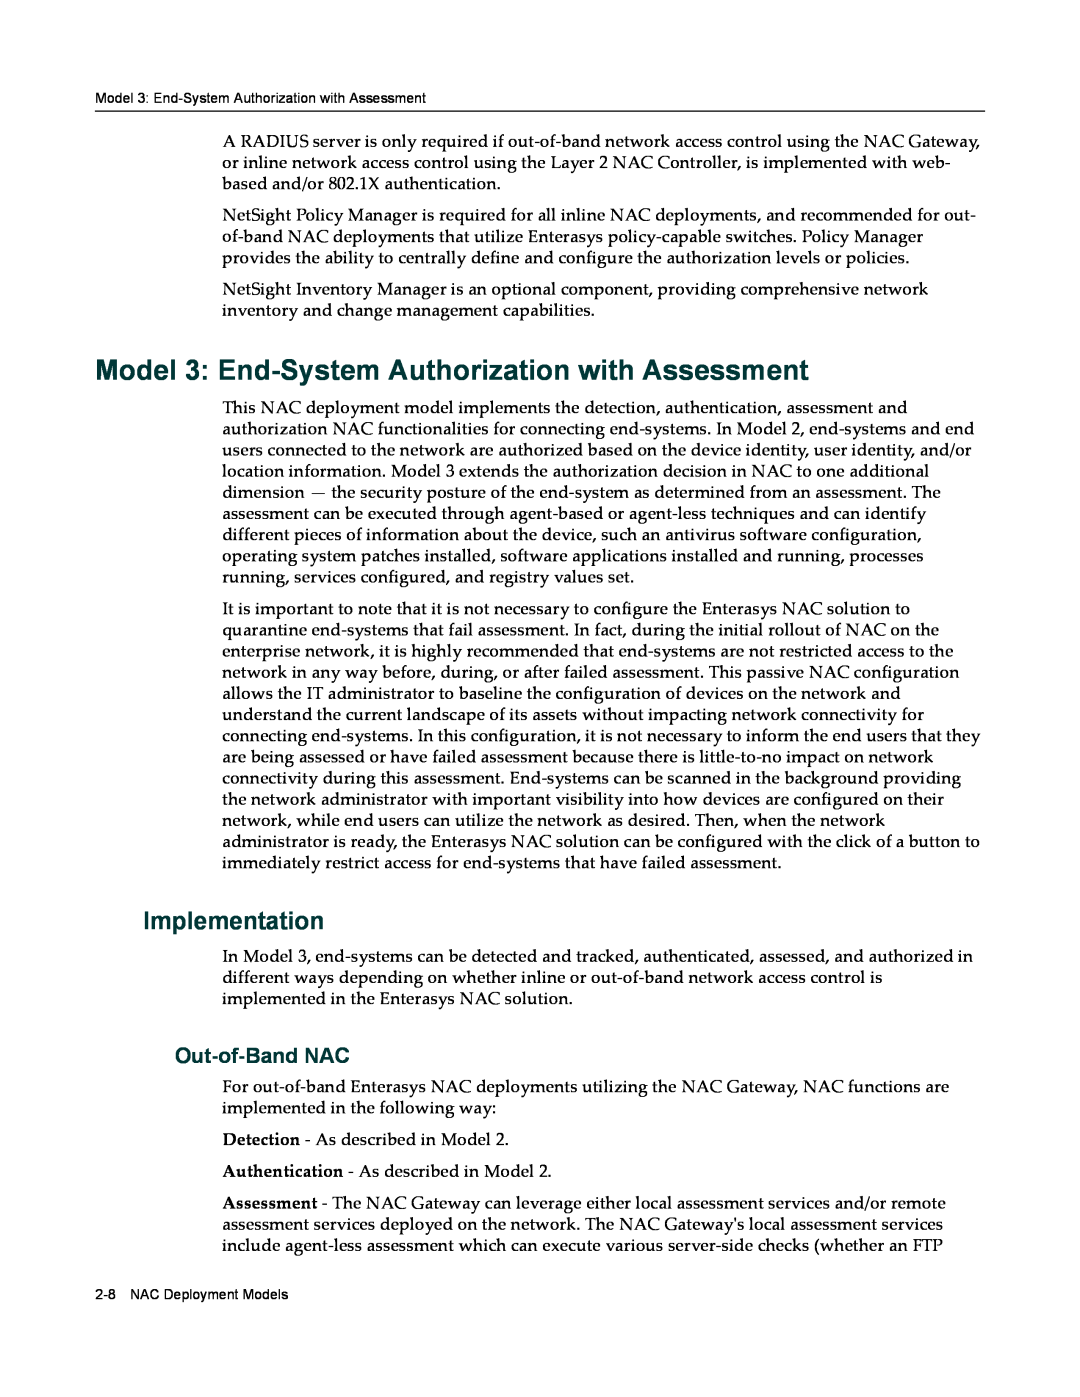 Enterasys Networks 9034385 manual Model 3 End-System Authorization with Assessment, Implementation, Out-of-Band NAC 